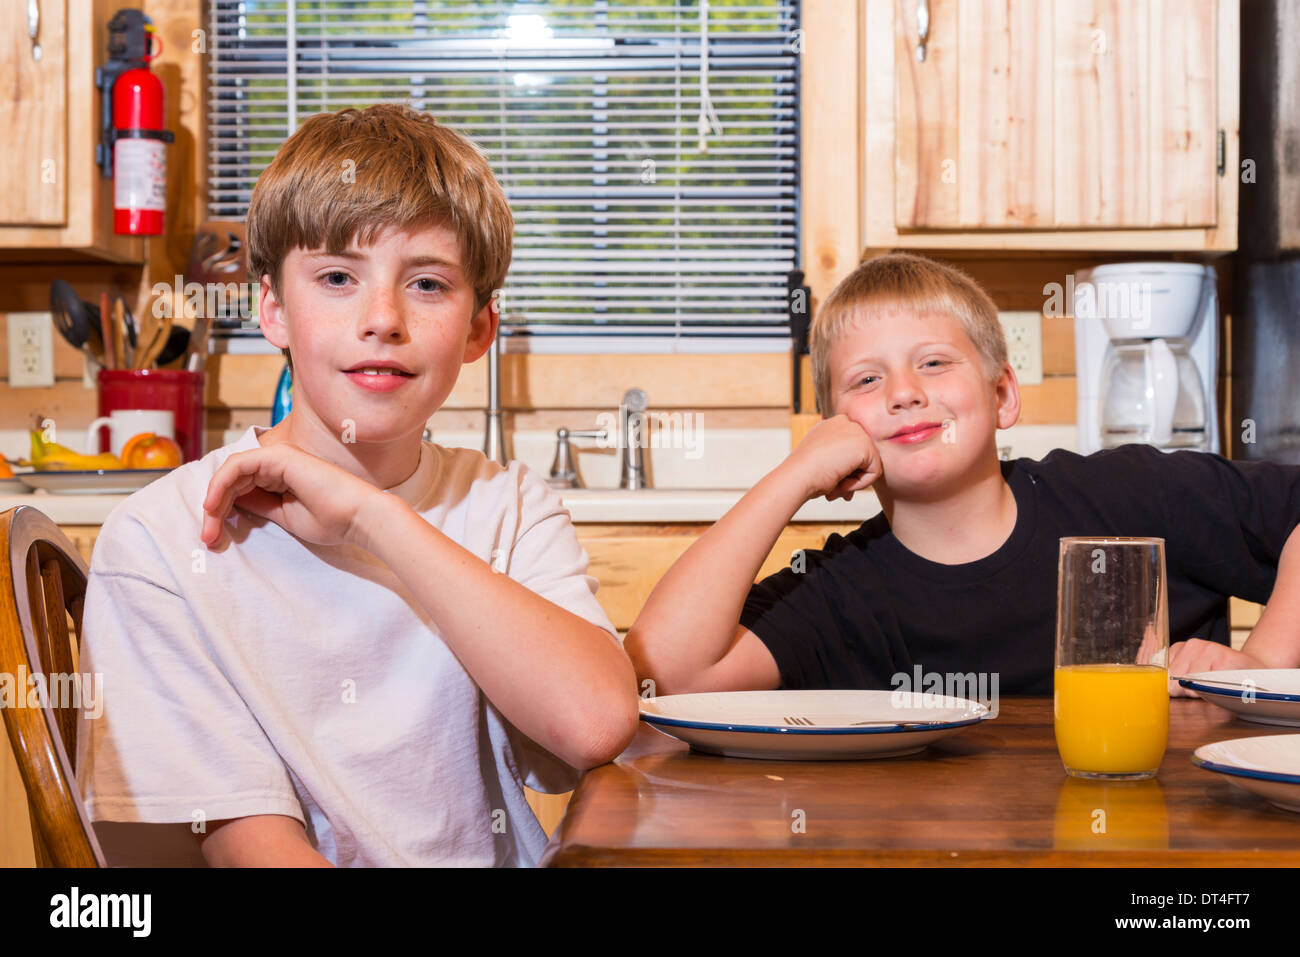 2 male children looking at camera while sitting at a kitchen table with plates and a glass of orange juice Stock Photo